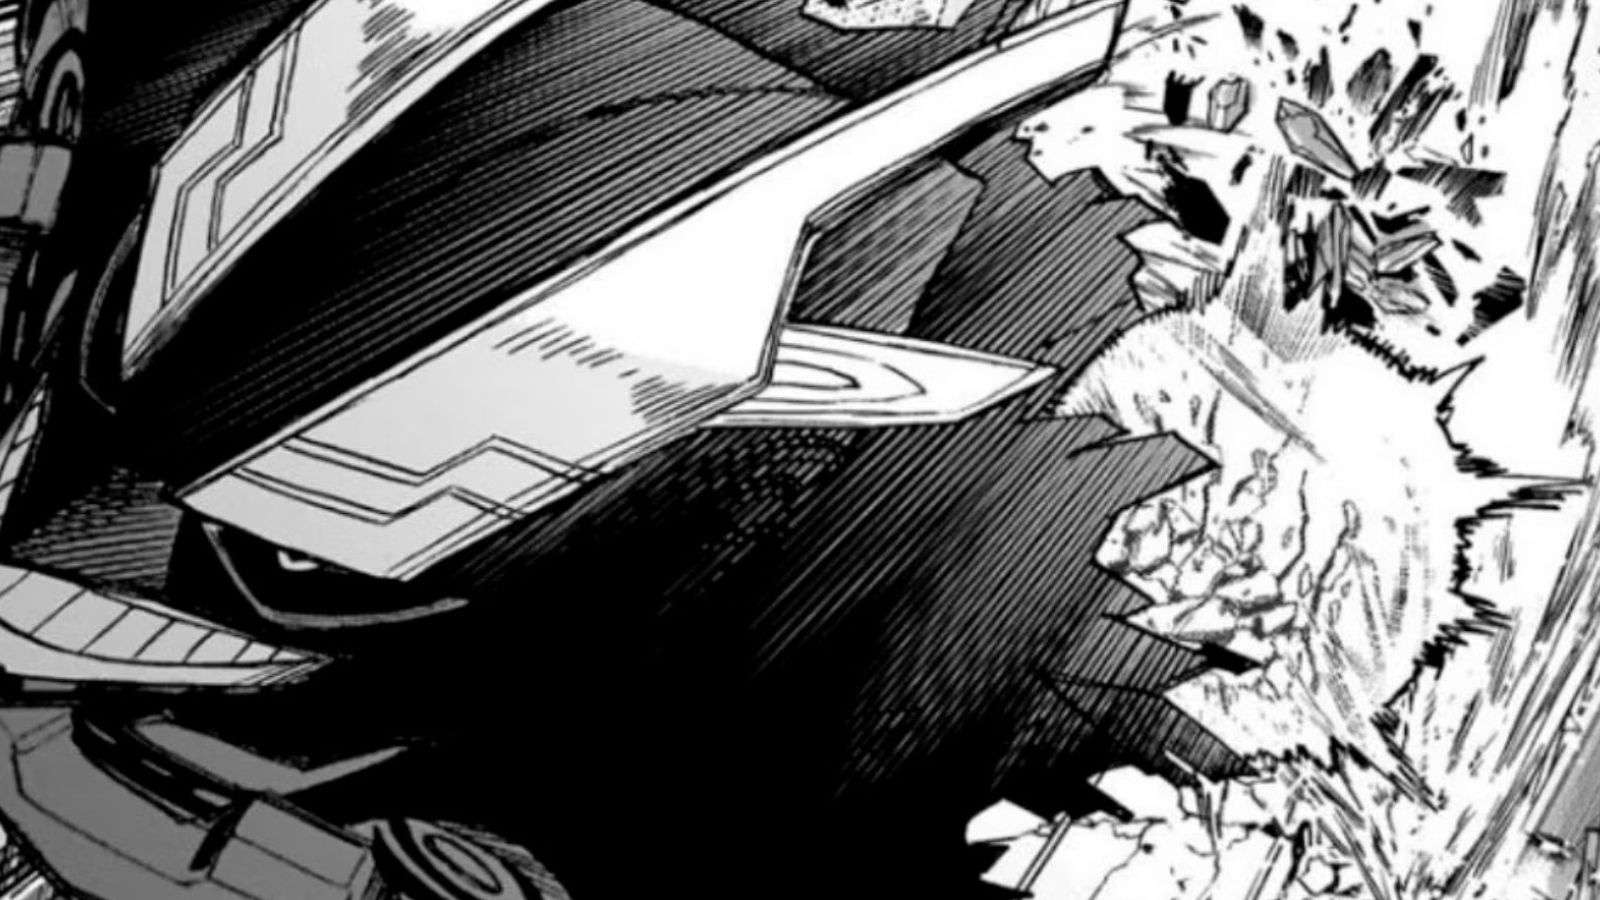 A panel showing All Might in his armored suit